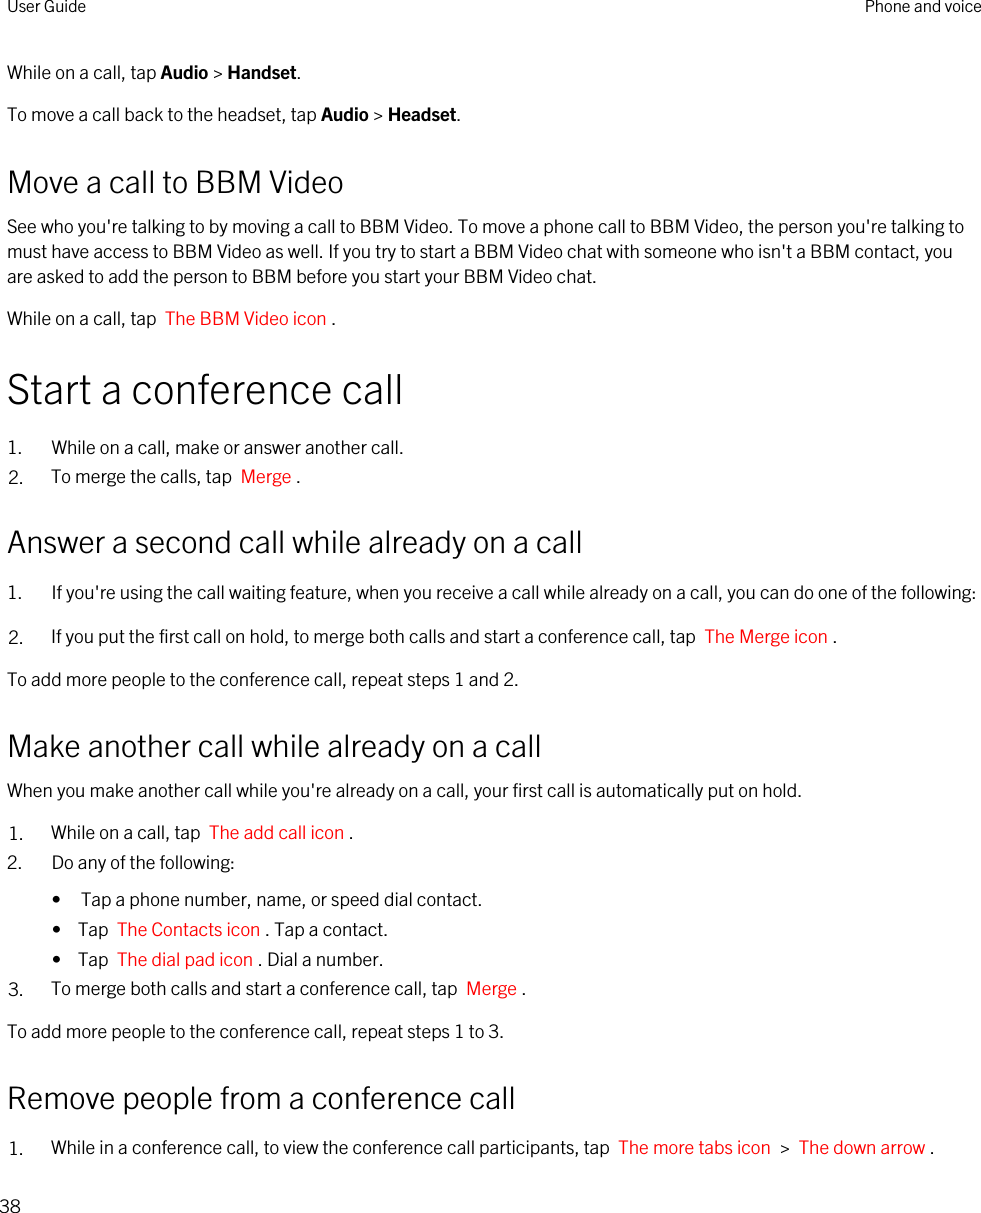 While on a call, tap Audio &gt; Handset.To move a call back to the headset, tap Audio &gt; Headset.Move a call to BBM VideoSee who you&apos;re talking to by moving a call to BBM Video. To move a phone call to BBM Video, the person you&apos;re talking to must have access to BBM Video as well. If you try to start a BBM Video chat with someone who isn&apos;t a BBM contact, you are asked to add the person to BBM before you start your BBM Video chat.While on a call, tap  The BBM Video icon .Start a conference call1. While on a call, make or answer another call.2. To merge the calls, tap  Merge .Answer a second call while already on a call1. If you&apos;re using the call waiting feature, when you receive a call while already on a call, you can do one of the following:2. If you put the first call on hold, to merge both calls and start a conference call, tap  The Merge icon .To add more people to the conference call, repeat steps 1 and 2.Make another call while already on a callWhen you make another call while you&apos;re already on a call, your first call is automatically put on hold.1. While on a call, tap  The add call icon .2. Do any of the following:• Tap a phone number, name, or speed dial contact.•  Tap  The Contacts icon . Tap a contact.•  Tap  The dial pad icon . Dial a number.3. To merge both calls and start a conference call, tap  Merge .To add more people to the conference call, repeat steps 1 to 3.Remove people from a conference call1. While in a conference call, to view the conference call participants, tap  The more tabs icon  &gt;  The down arrow . User Guide Phone and voice38